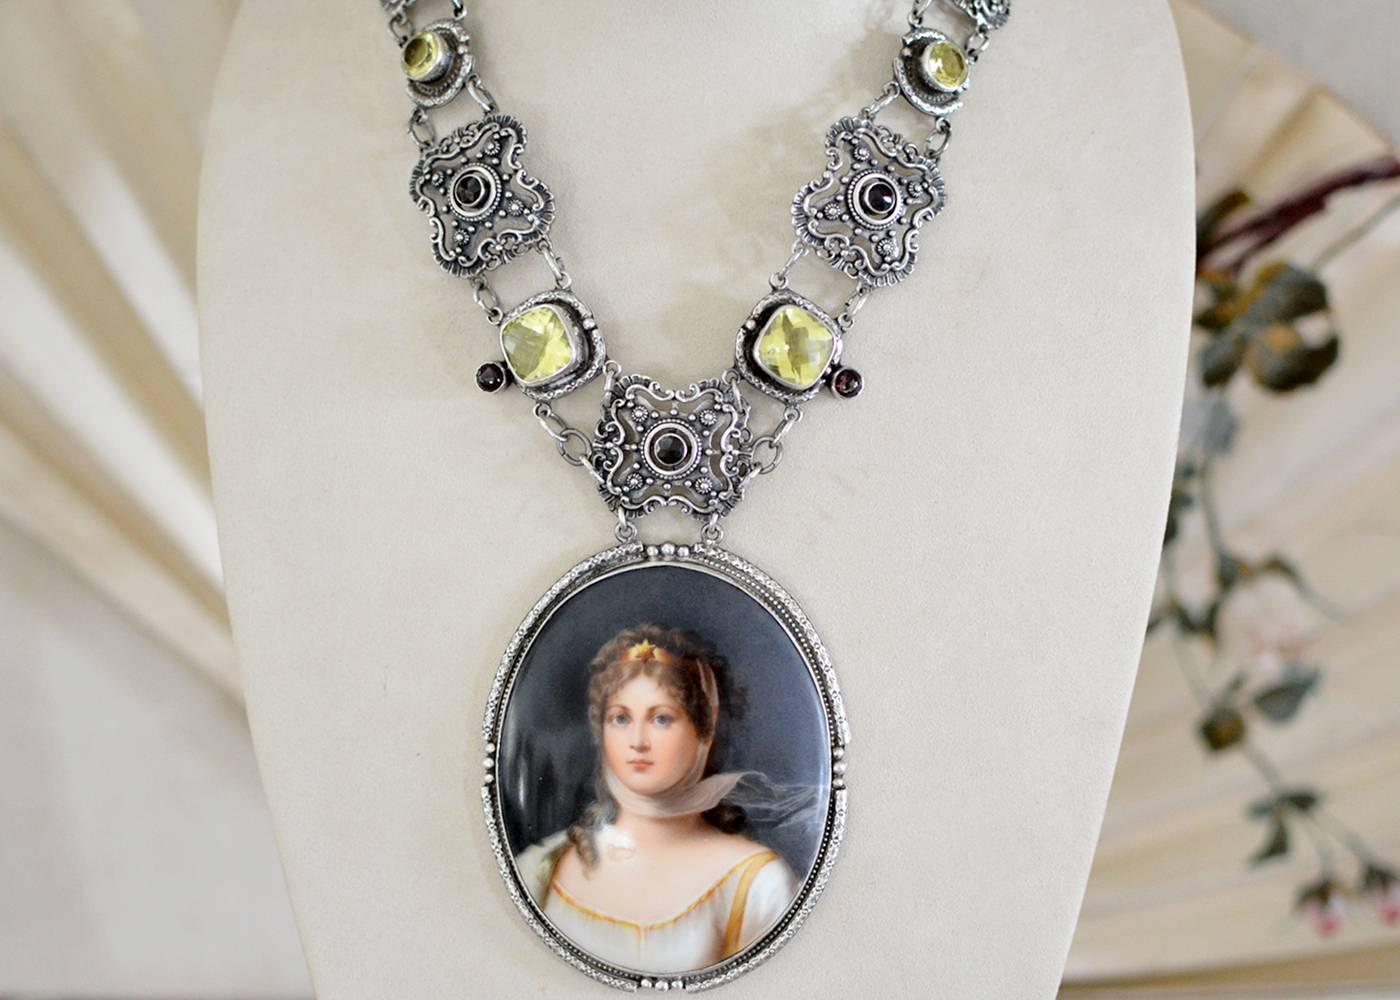 An important nineteenth century porcelain portrait attributed to KPM, depicting Queen Louise of Prussia becomes the important central element of this one of a kind Renaissance statement necklace. Elaborate collar like chaining consisting of